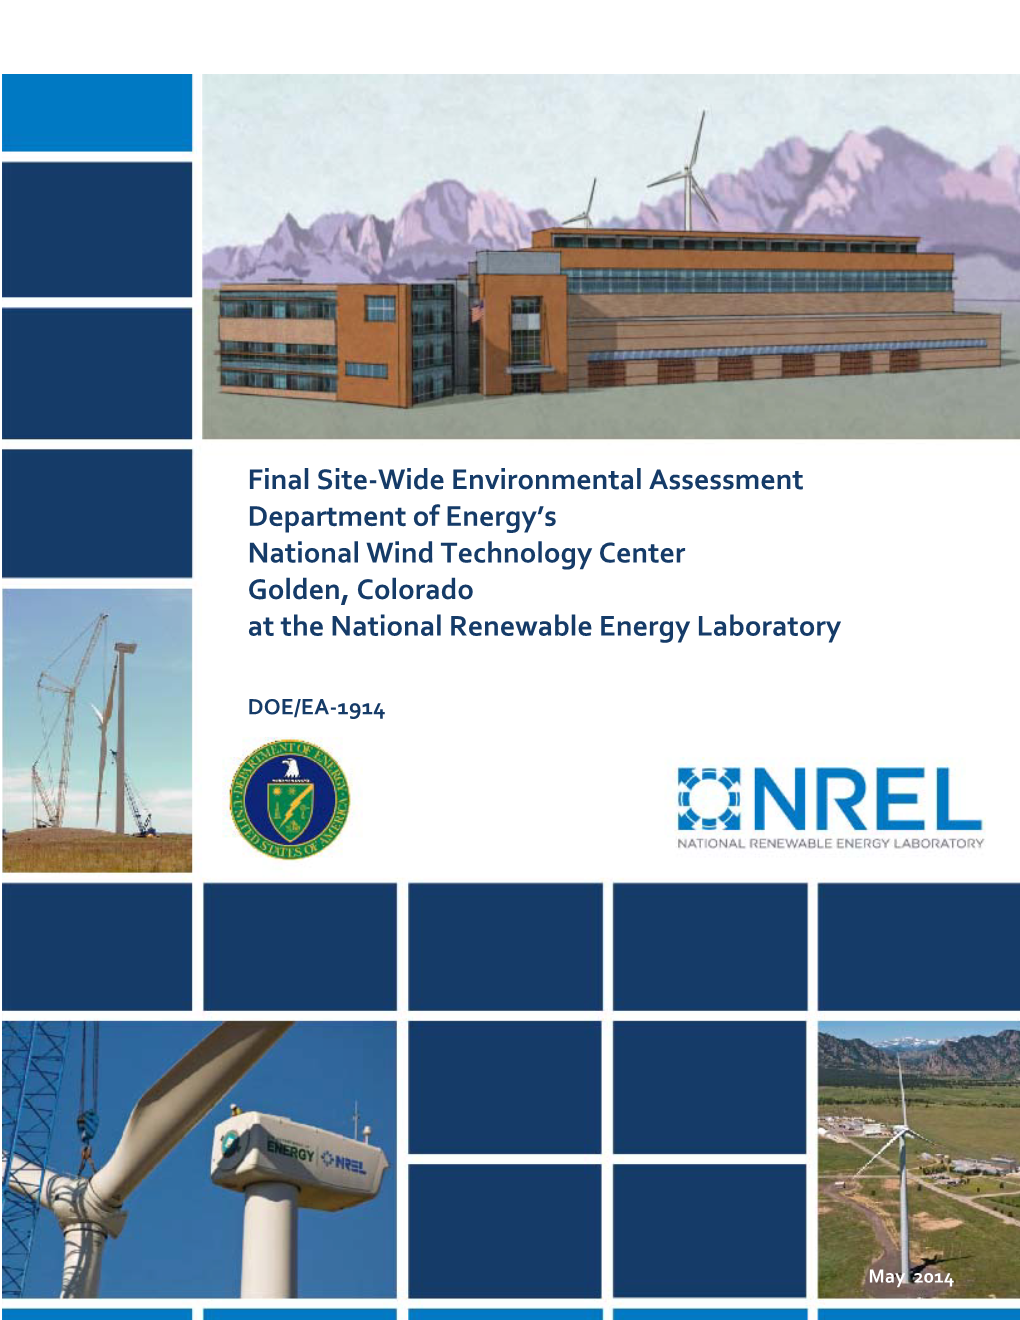 Final Site‐Wide Environmental Assessment Department of Energy's National Wind Technology Center at NREL